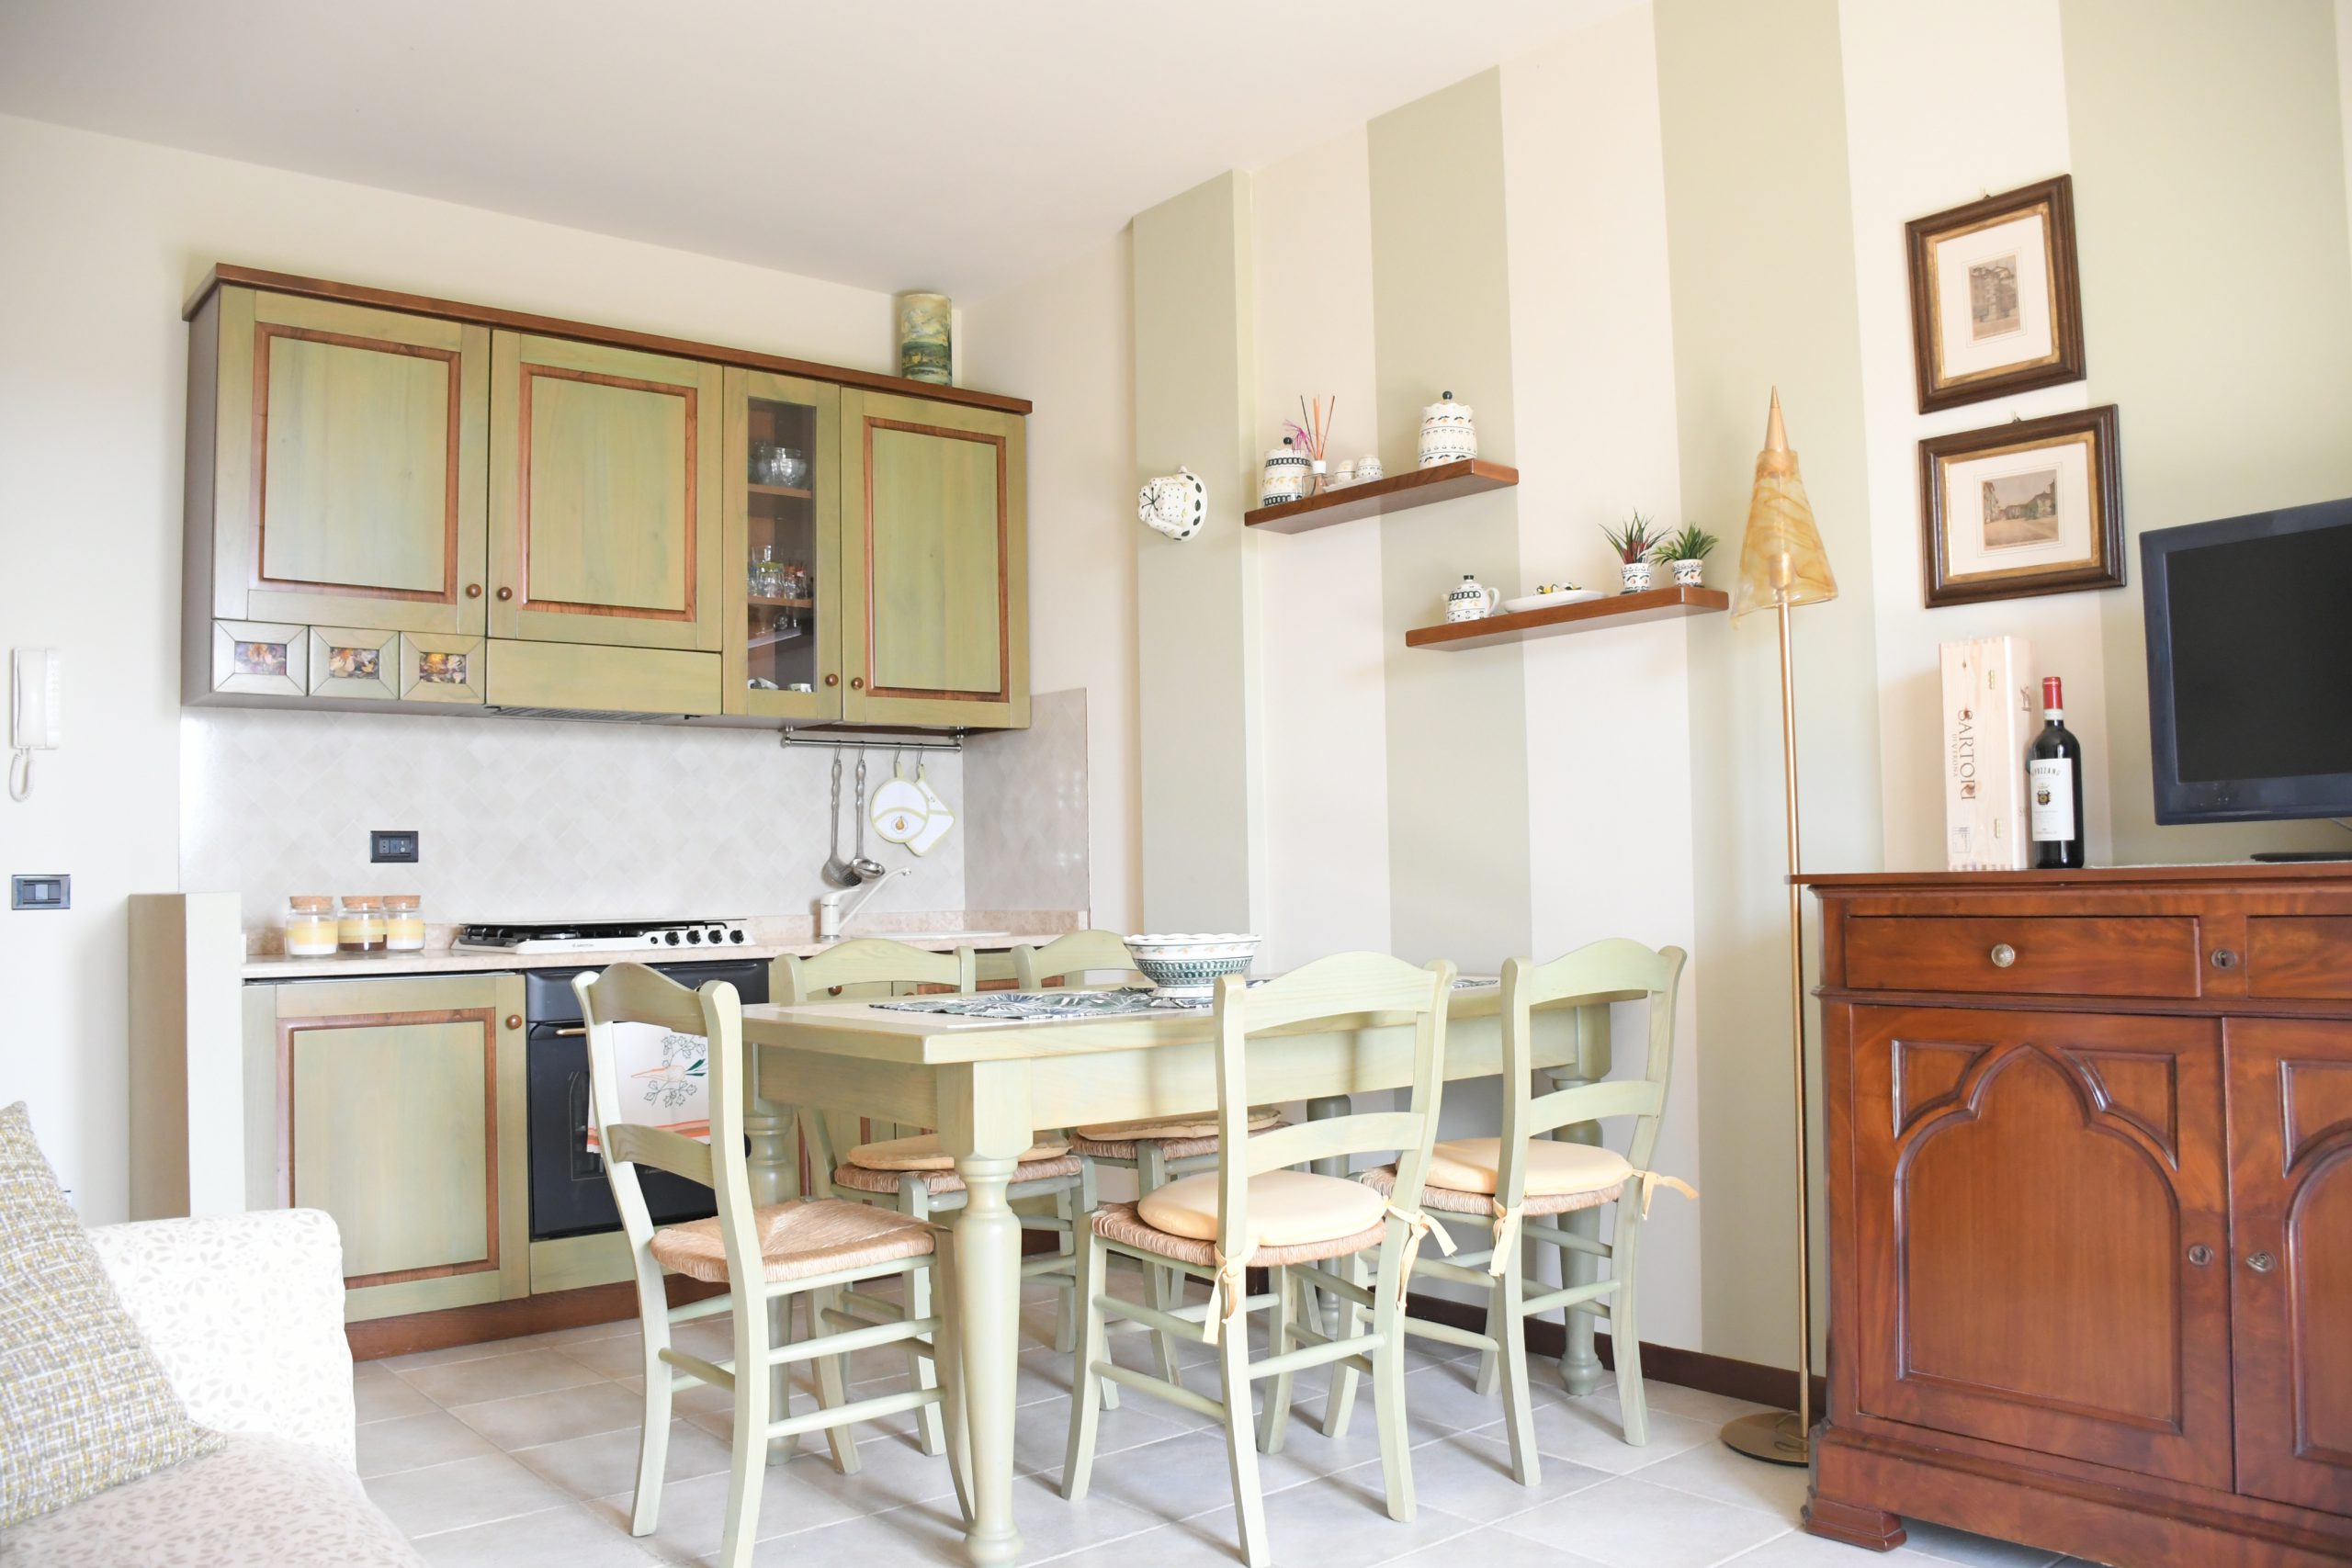 SIMONA'S HOME Apartment in Desenzano and Sirmione - Living Room Fully equipped kitchen